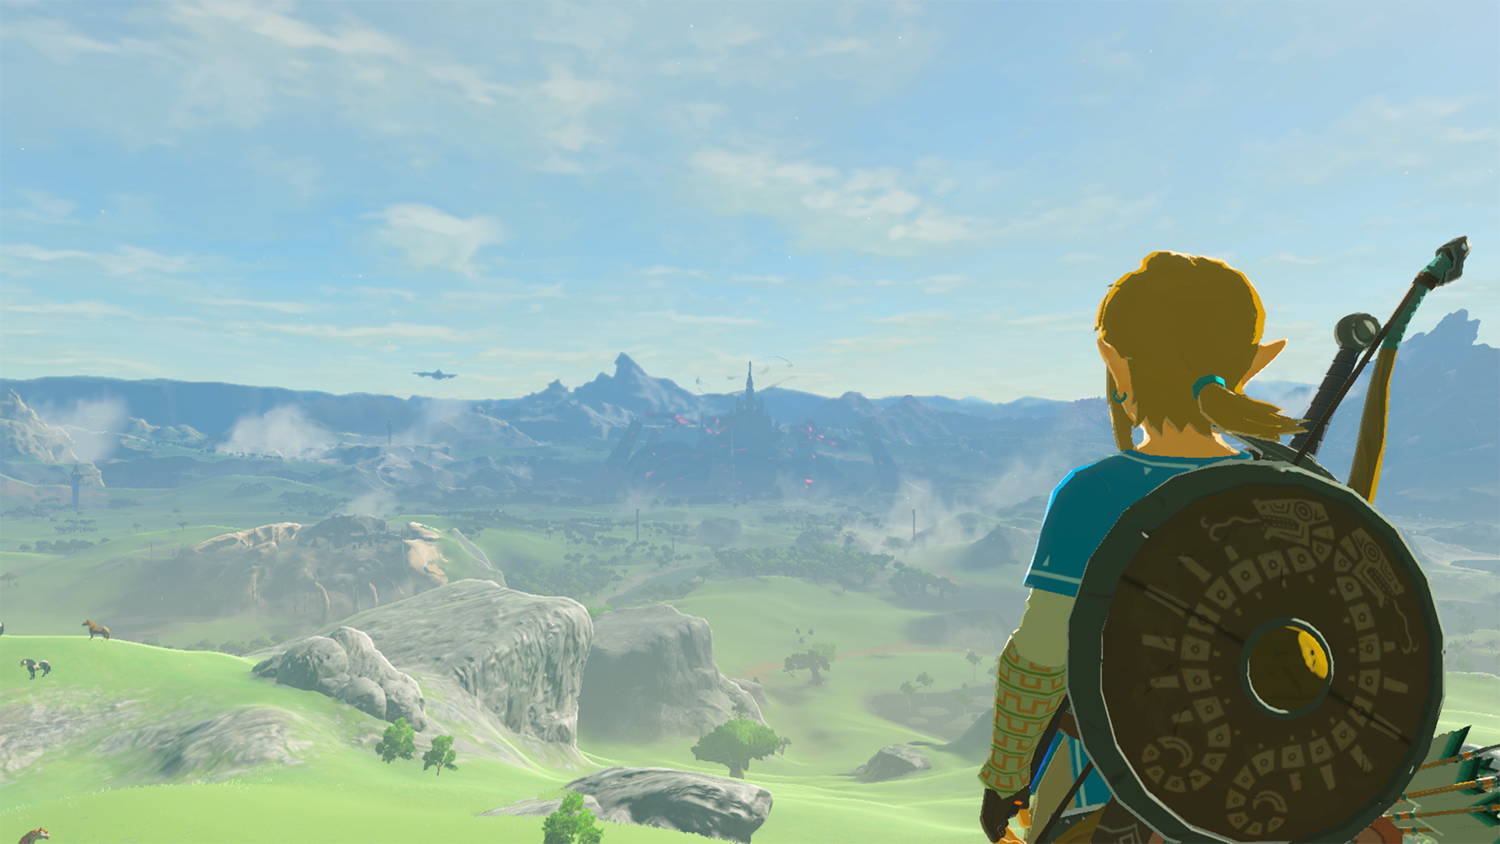 Link looks over Hyrule Kingdom in The Legend of Zelda: Breath of the Wild